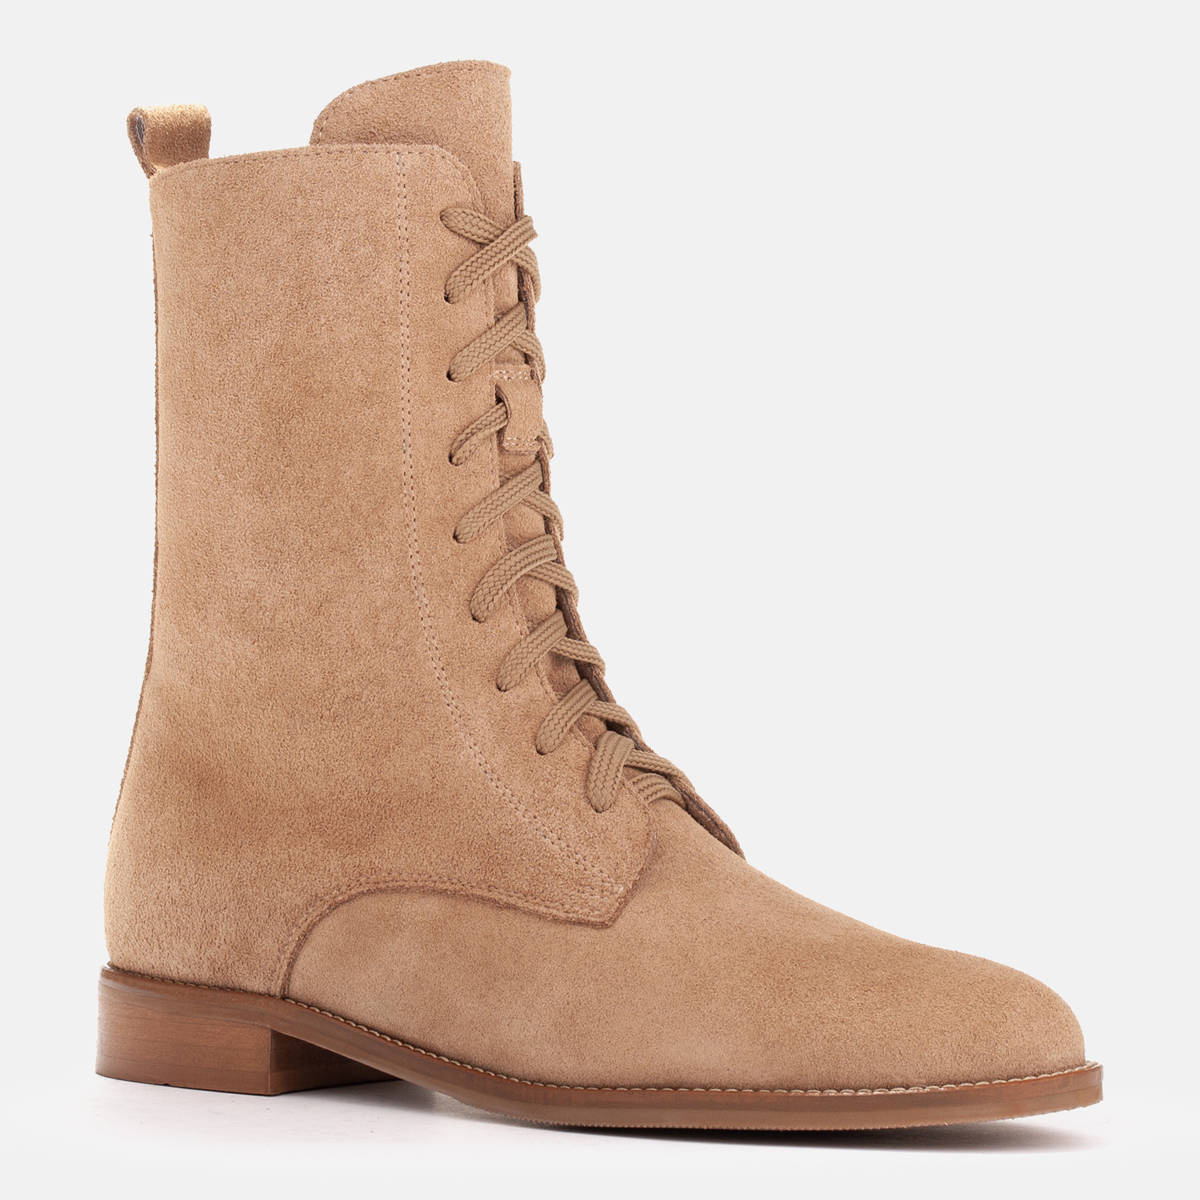 Classic low-heeled boots